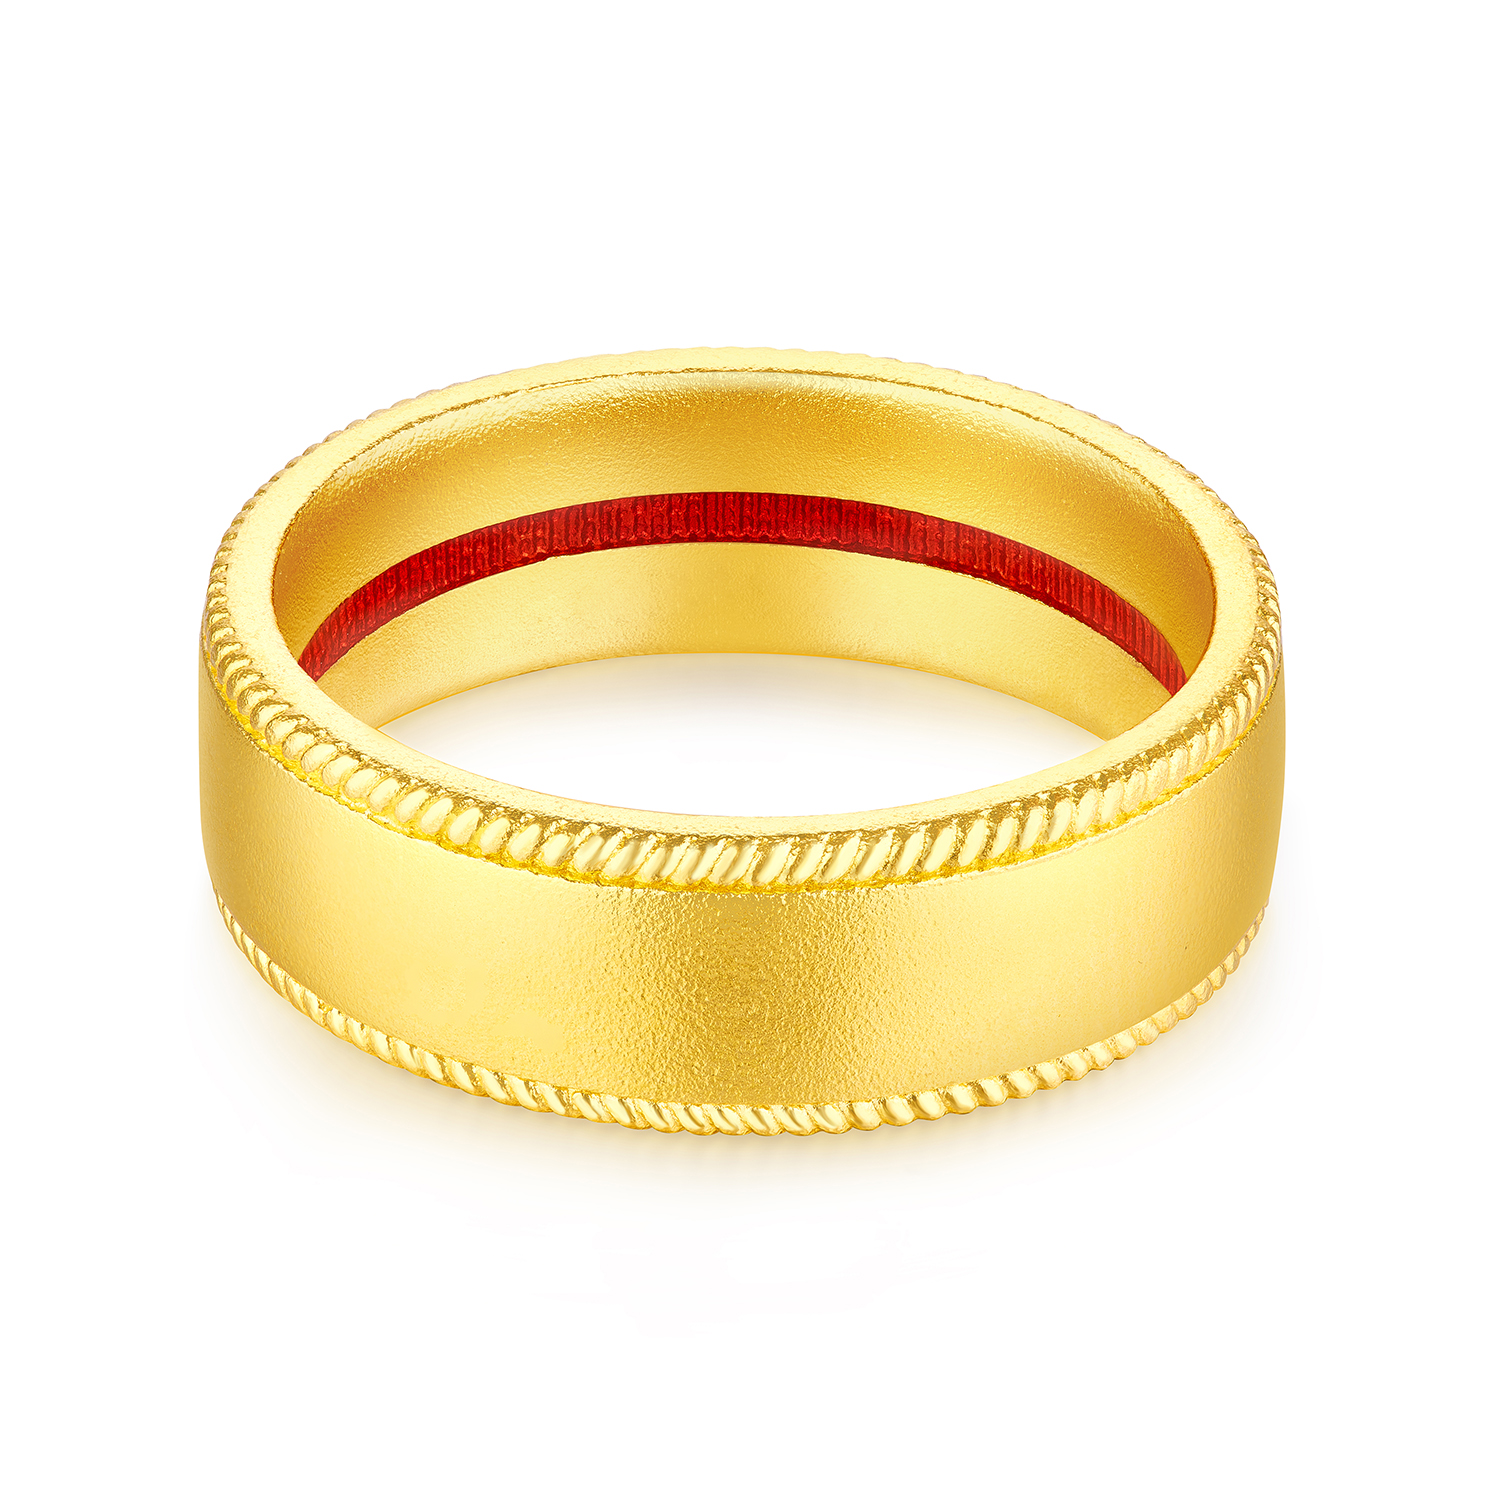 Heirloom Fortune Collection "Tie the Knot" Gold Wedding Rings 